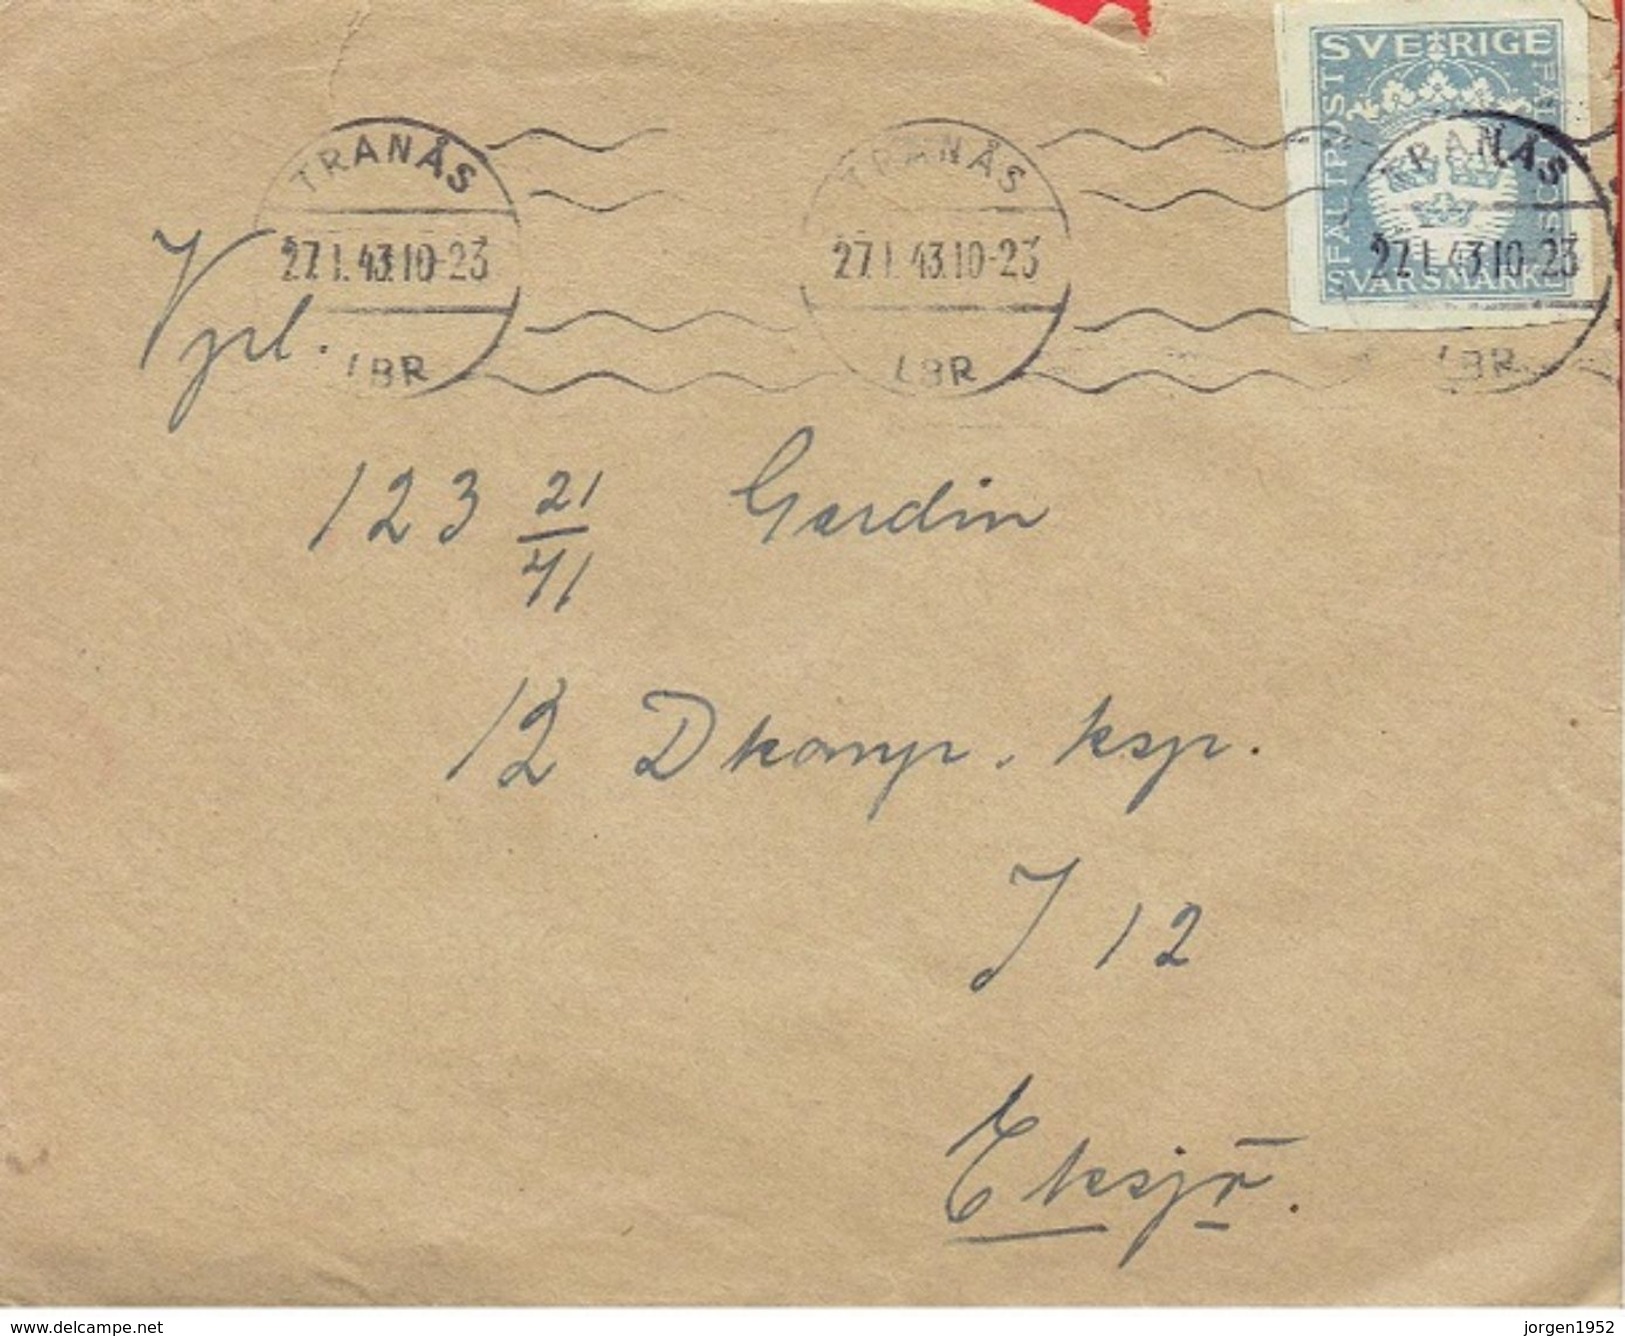 SWEDEN # MILITARY BRIEF   SEND FROM TRANÅS  27.1-1943 - Militaires